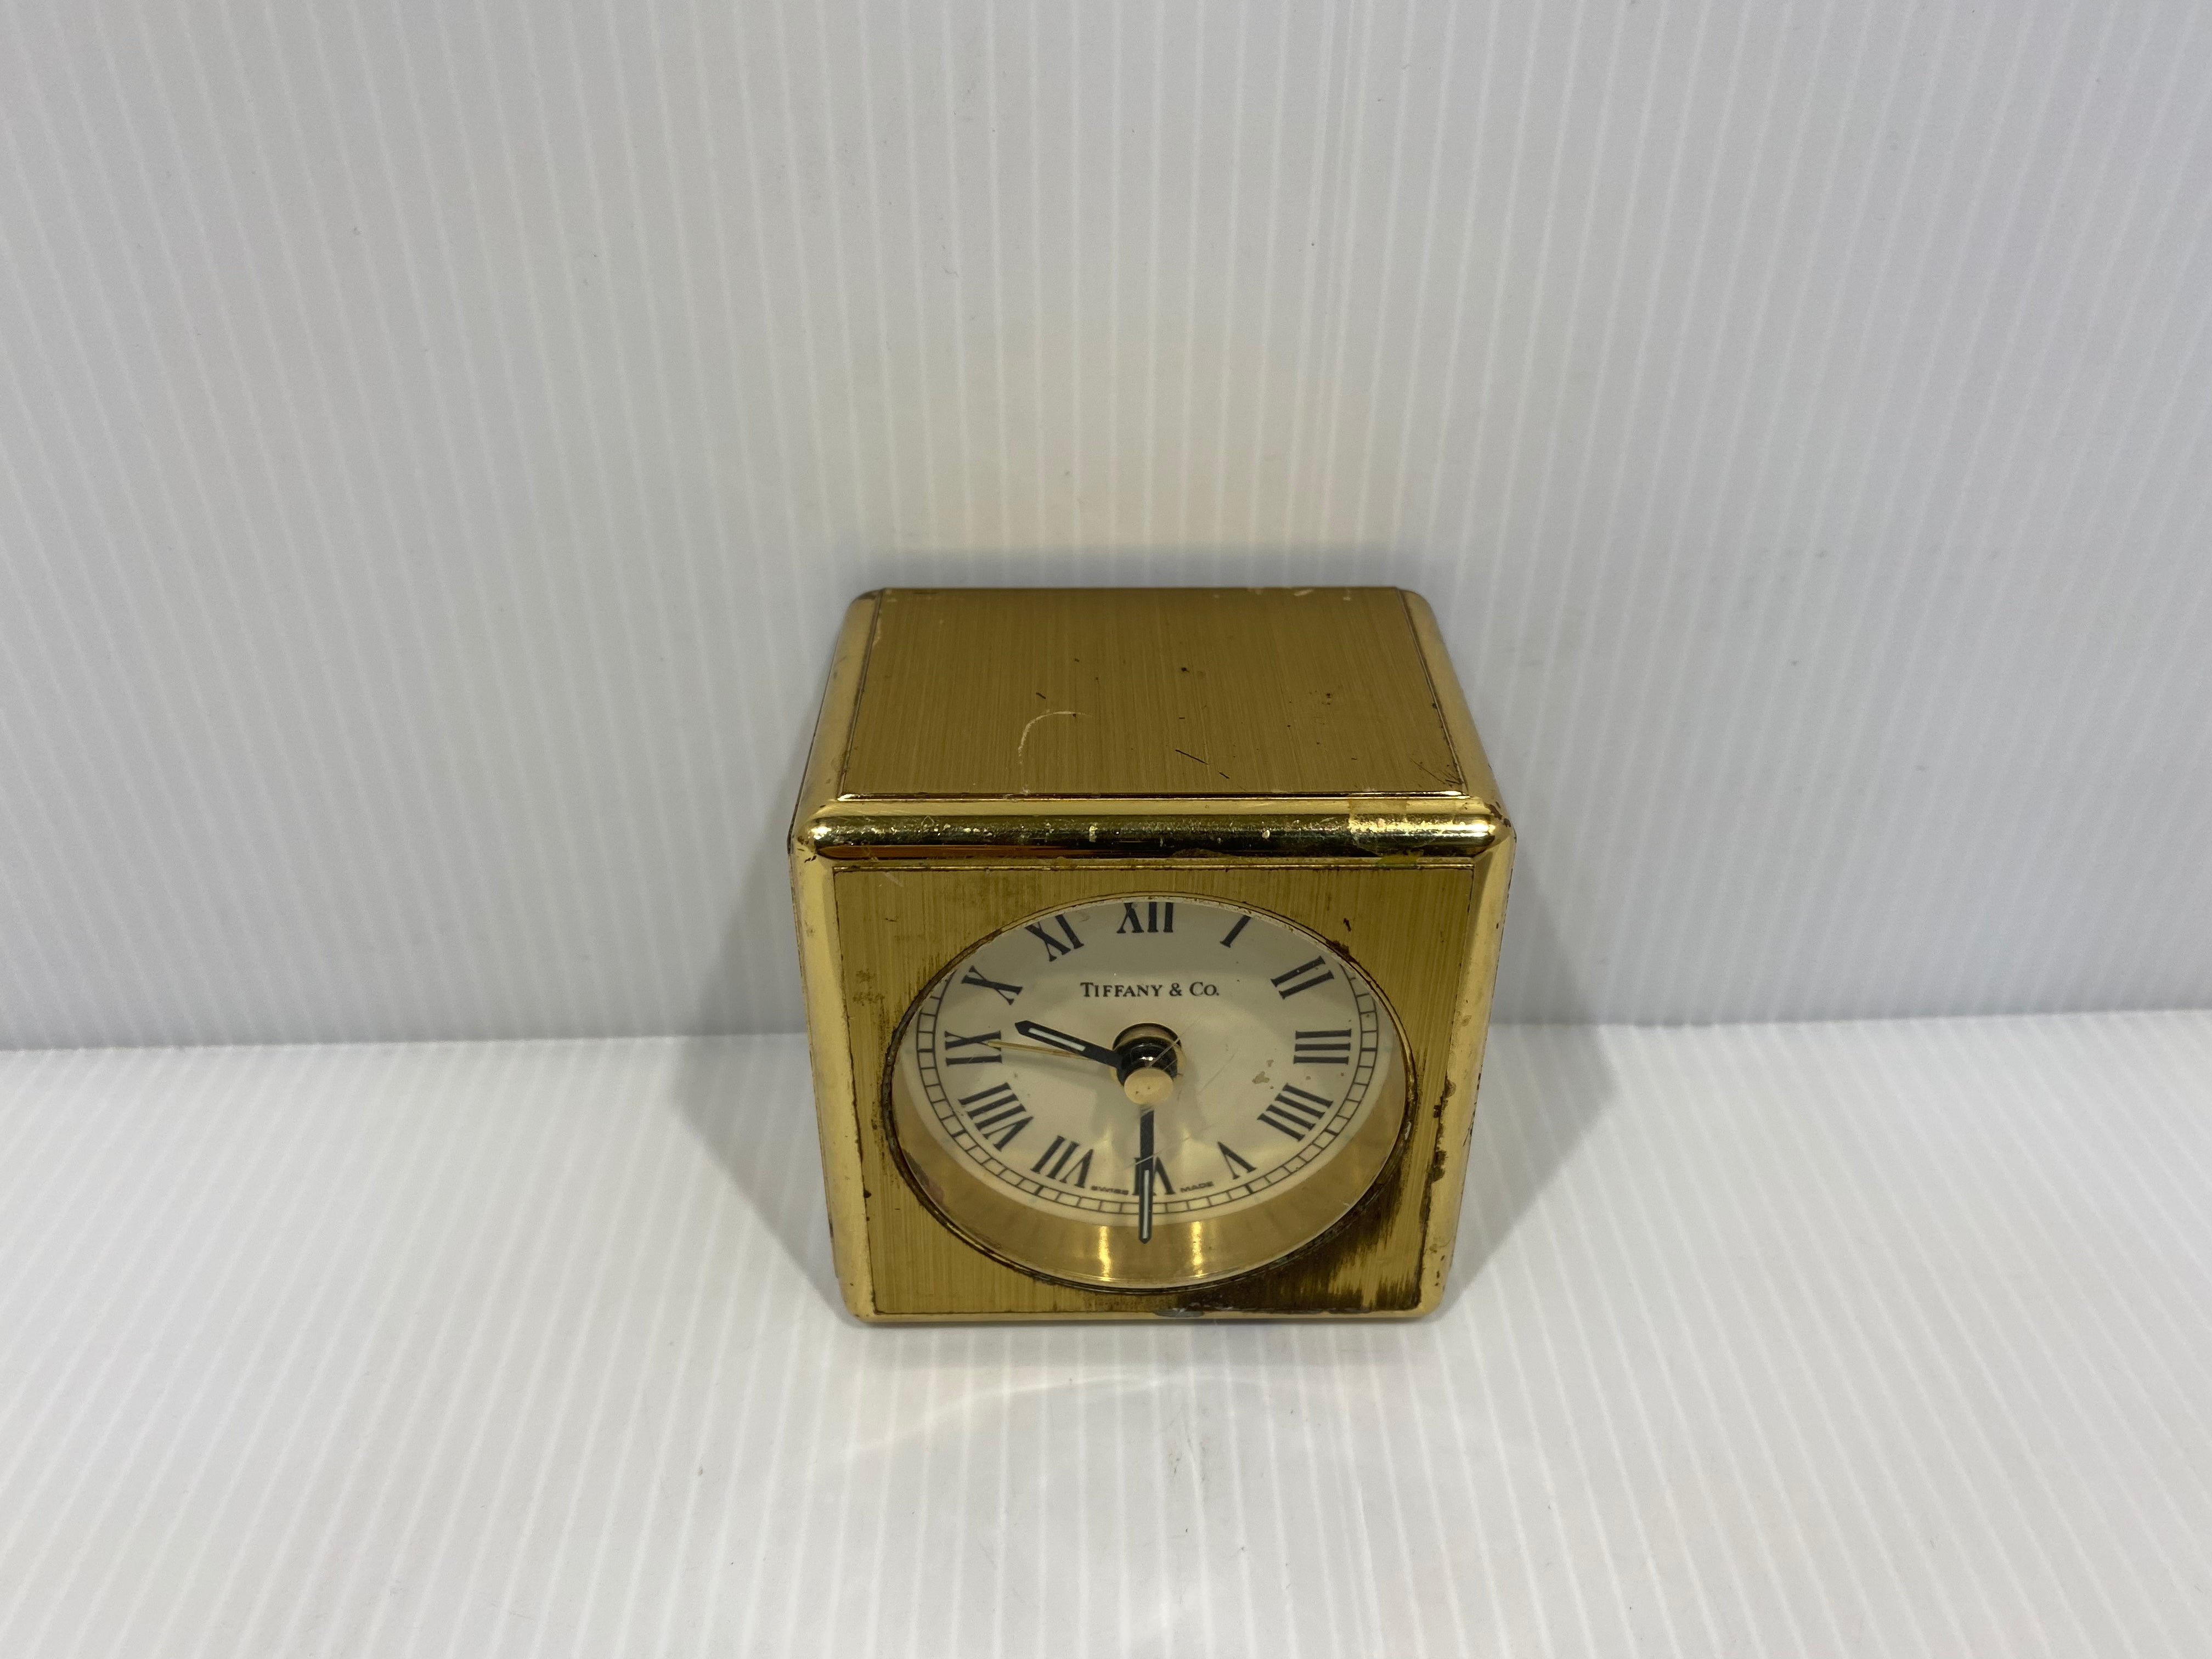 Tiffany & Co. solid brass collectible cube clock. Made of heavy thick brass with quartz clock and Alarm